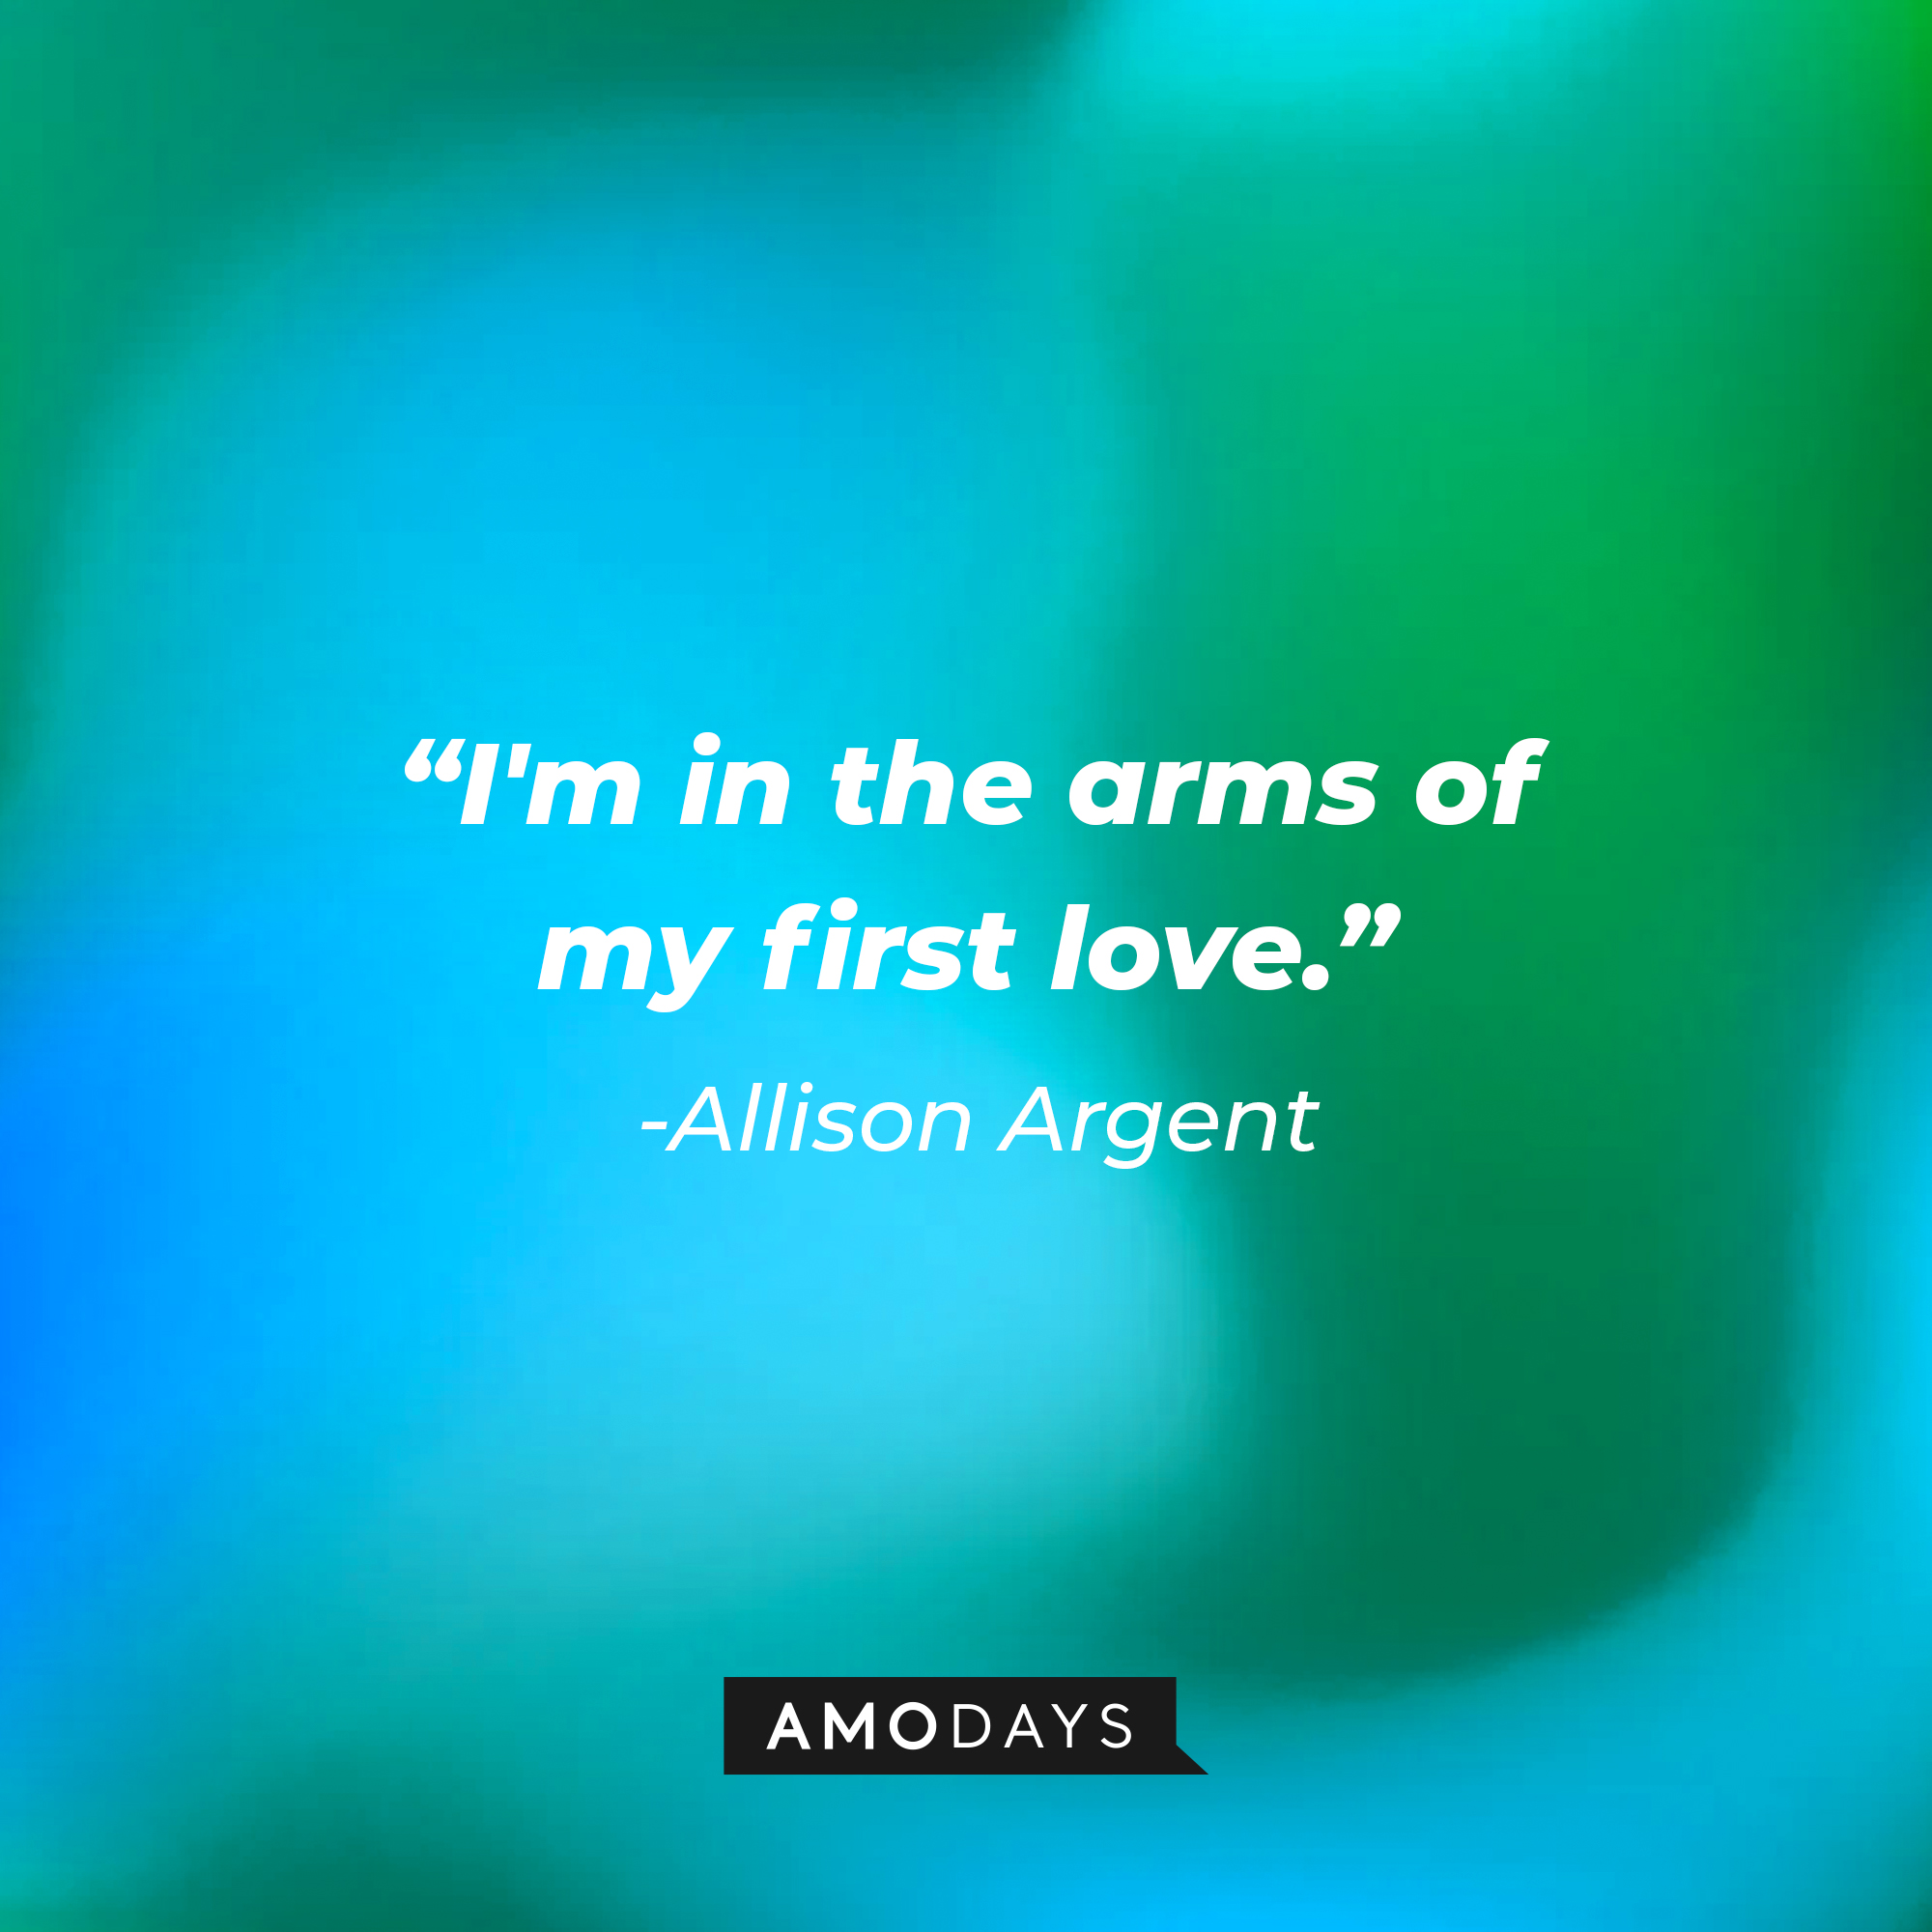 Allison Argen’s quote: "I'm in the arms of my first love." | Source: AmoDays